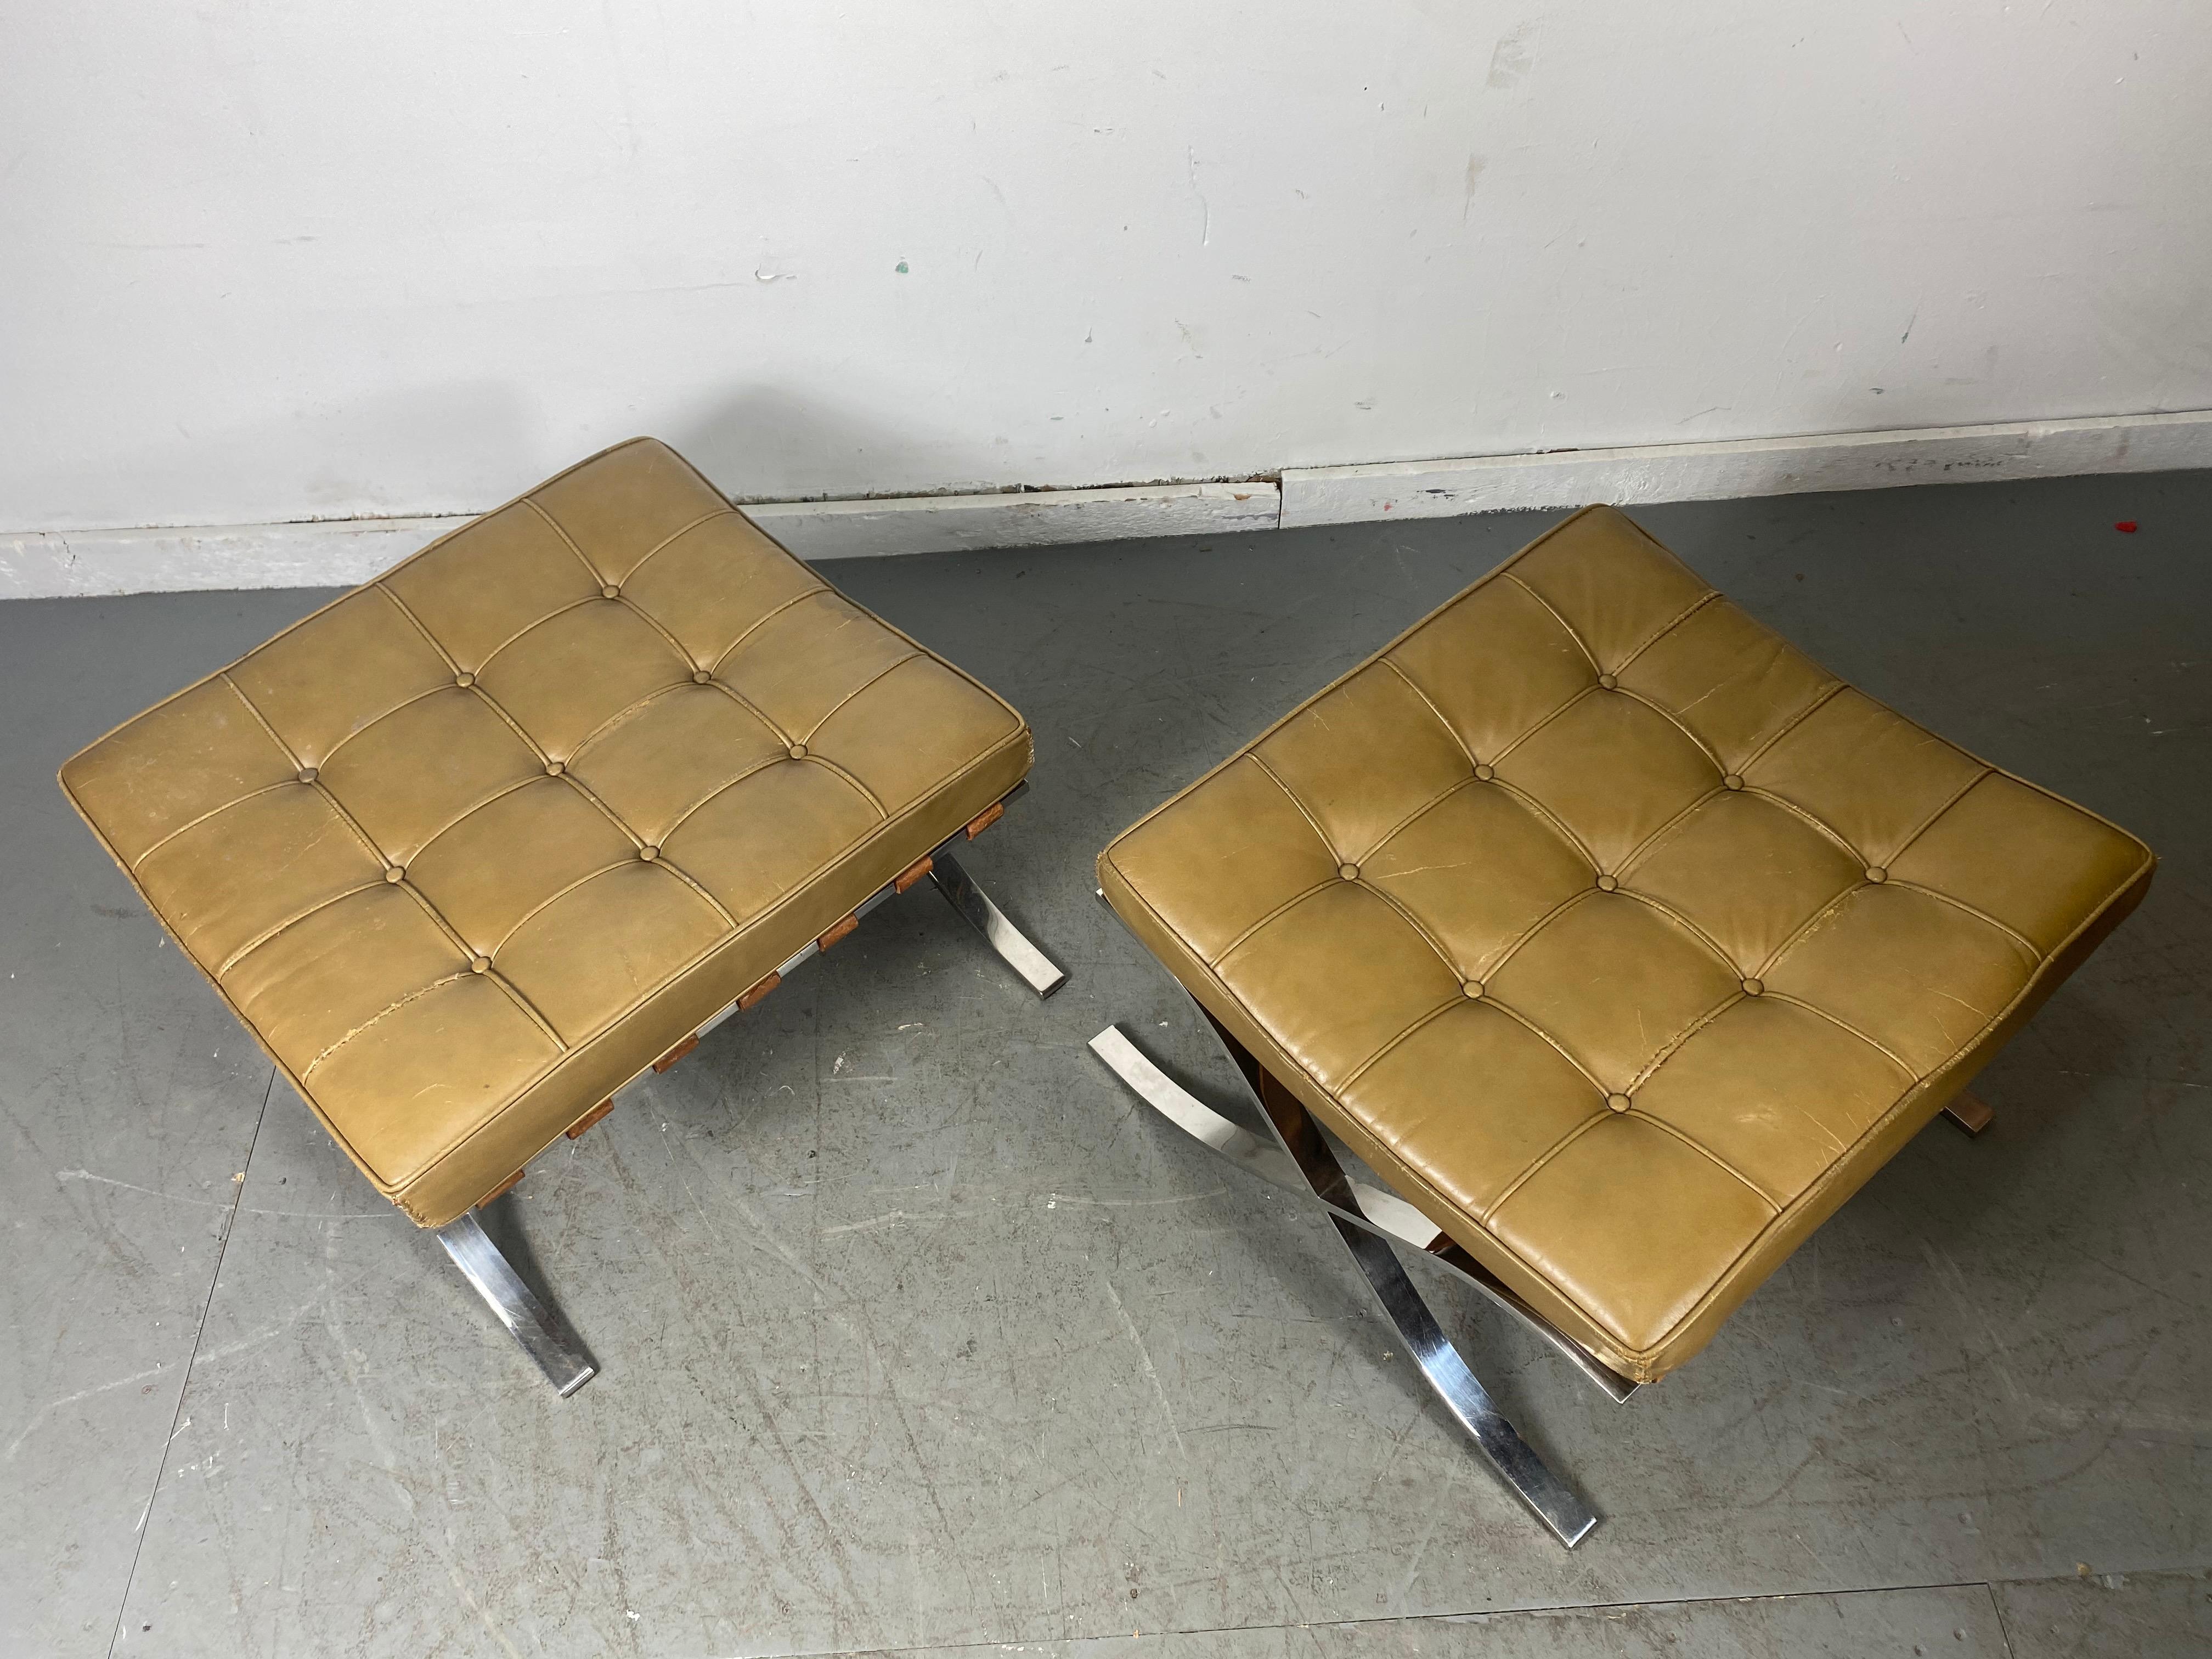 Rare Barcelona Ottomans by Mies van der Rohe for G.R. Griffith, Original Label In Good Condition For Sale In Buffalo, NY